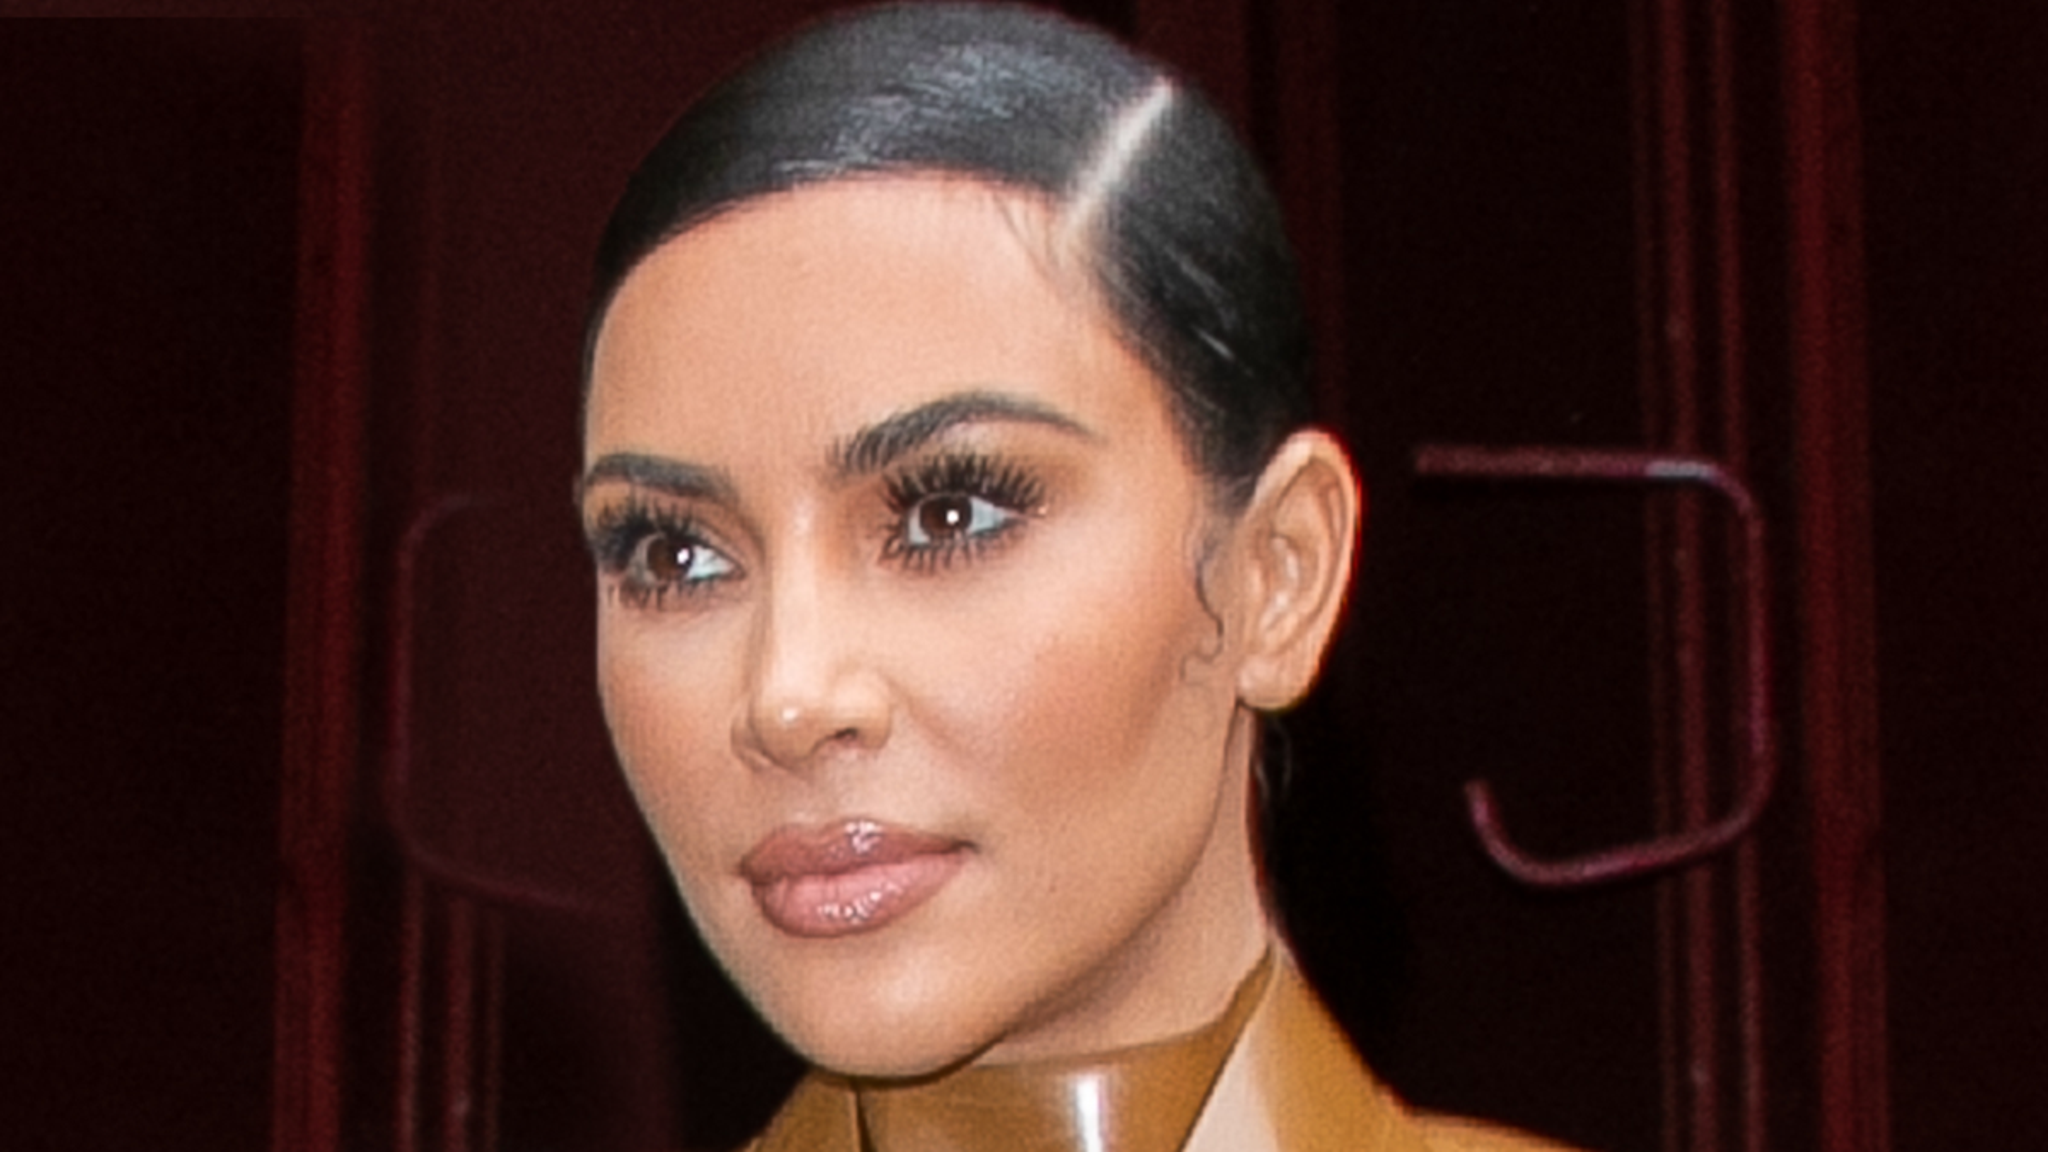 Kim Kardashian's New Look for KKW Beauty Could Be New 'SKKN' Trademark